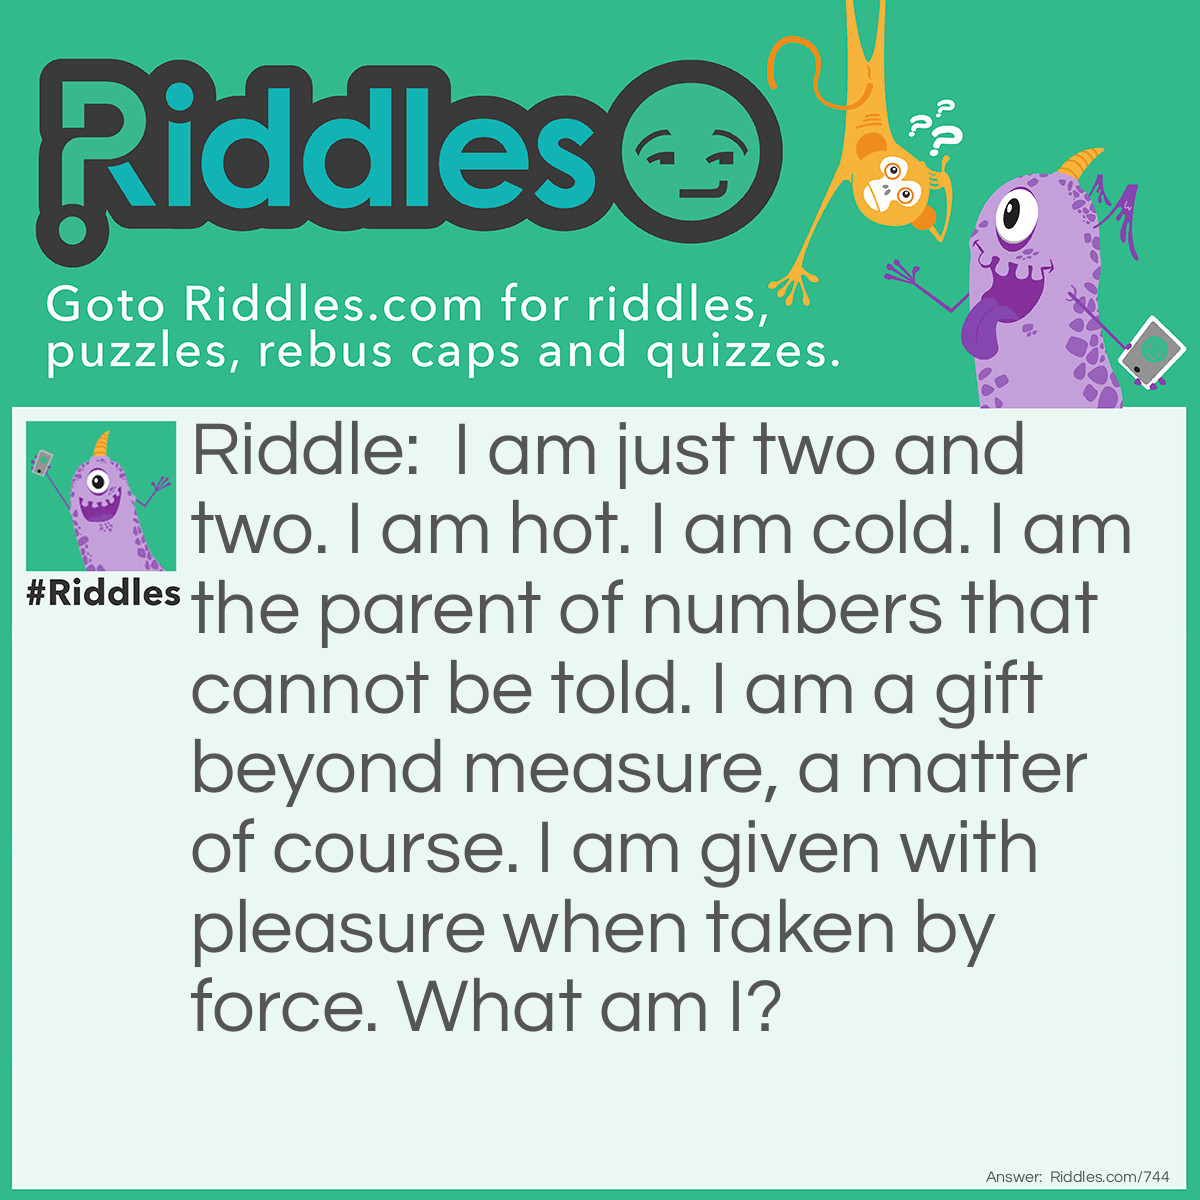 Riddle: I am just two and two. I am hot. I am cold. I am the parent of numbers that cannot be told. I am a gift beyond measure, a matter of course. I am given with pleasure when taken by force. 
What am I? Answer: I'm a Kiss!